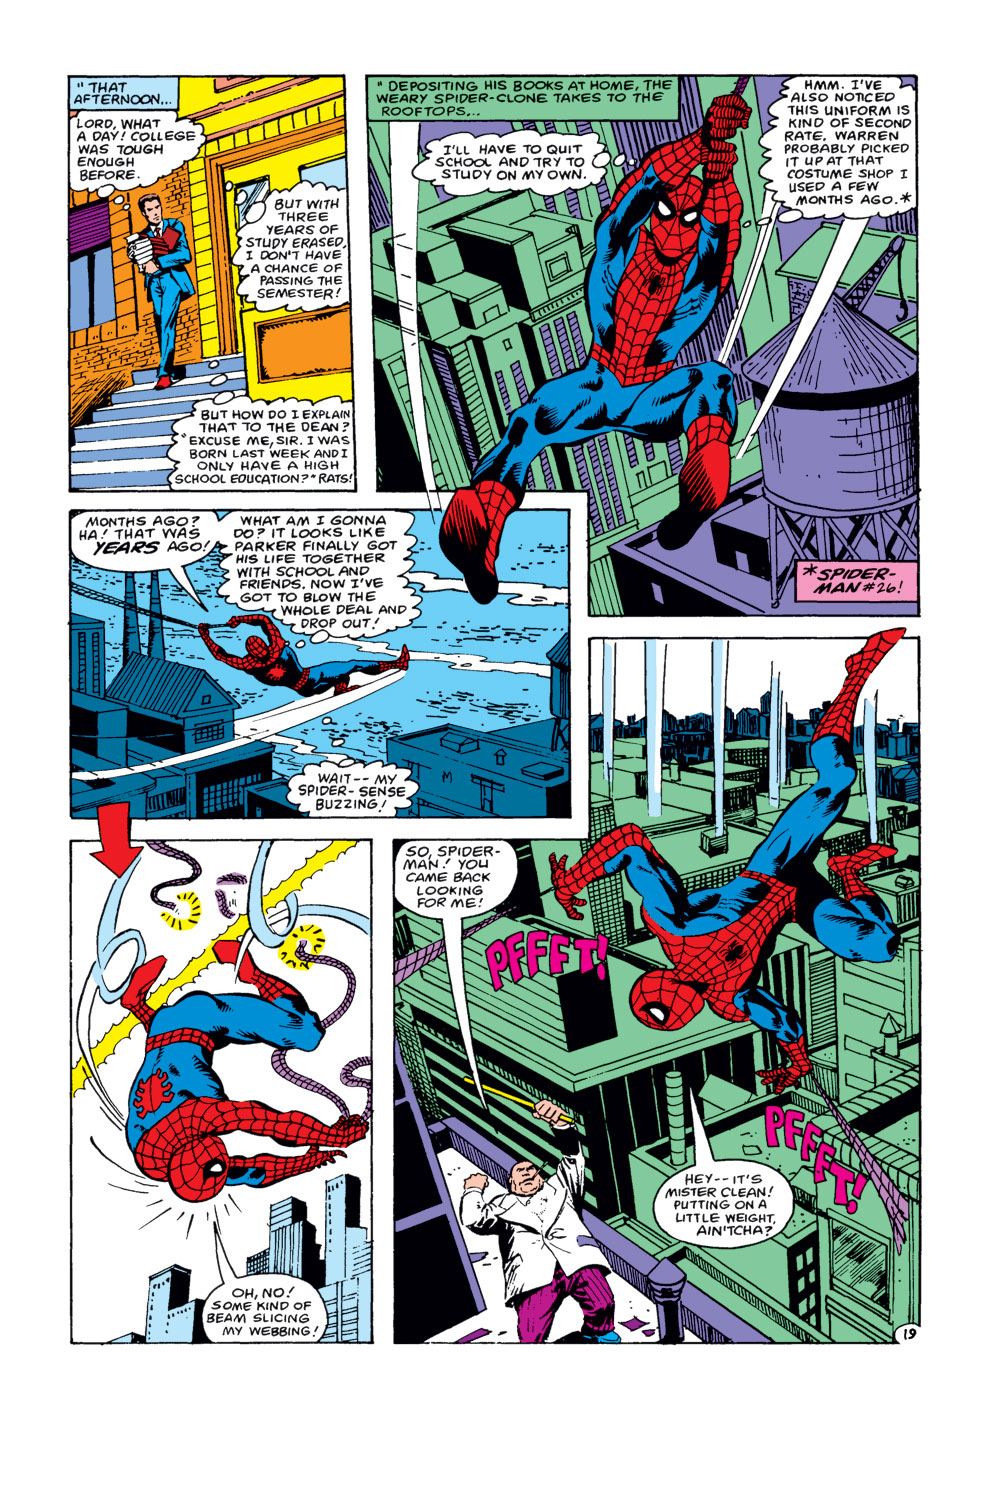 What If? (1977) issue 30 - Spider-Man's clone lived - Page 20